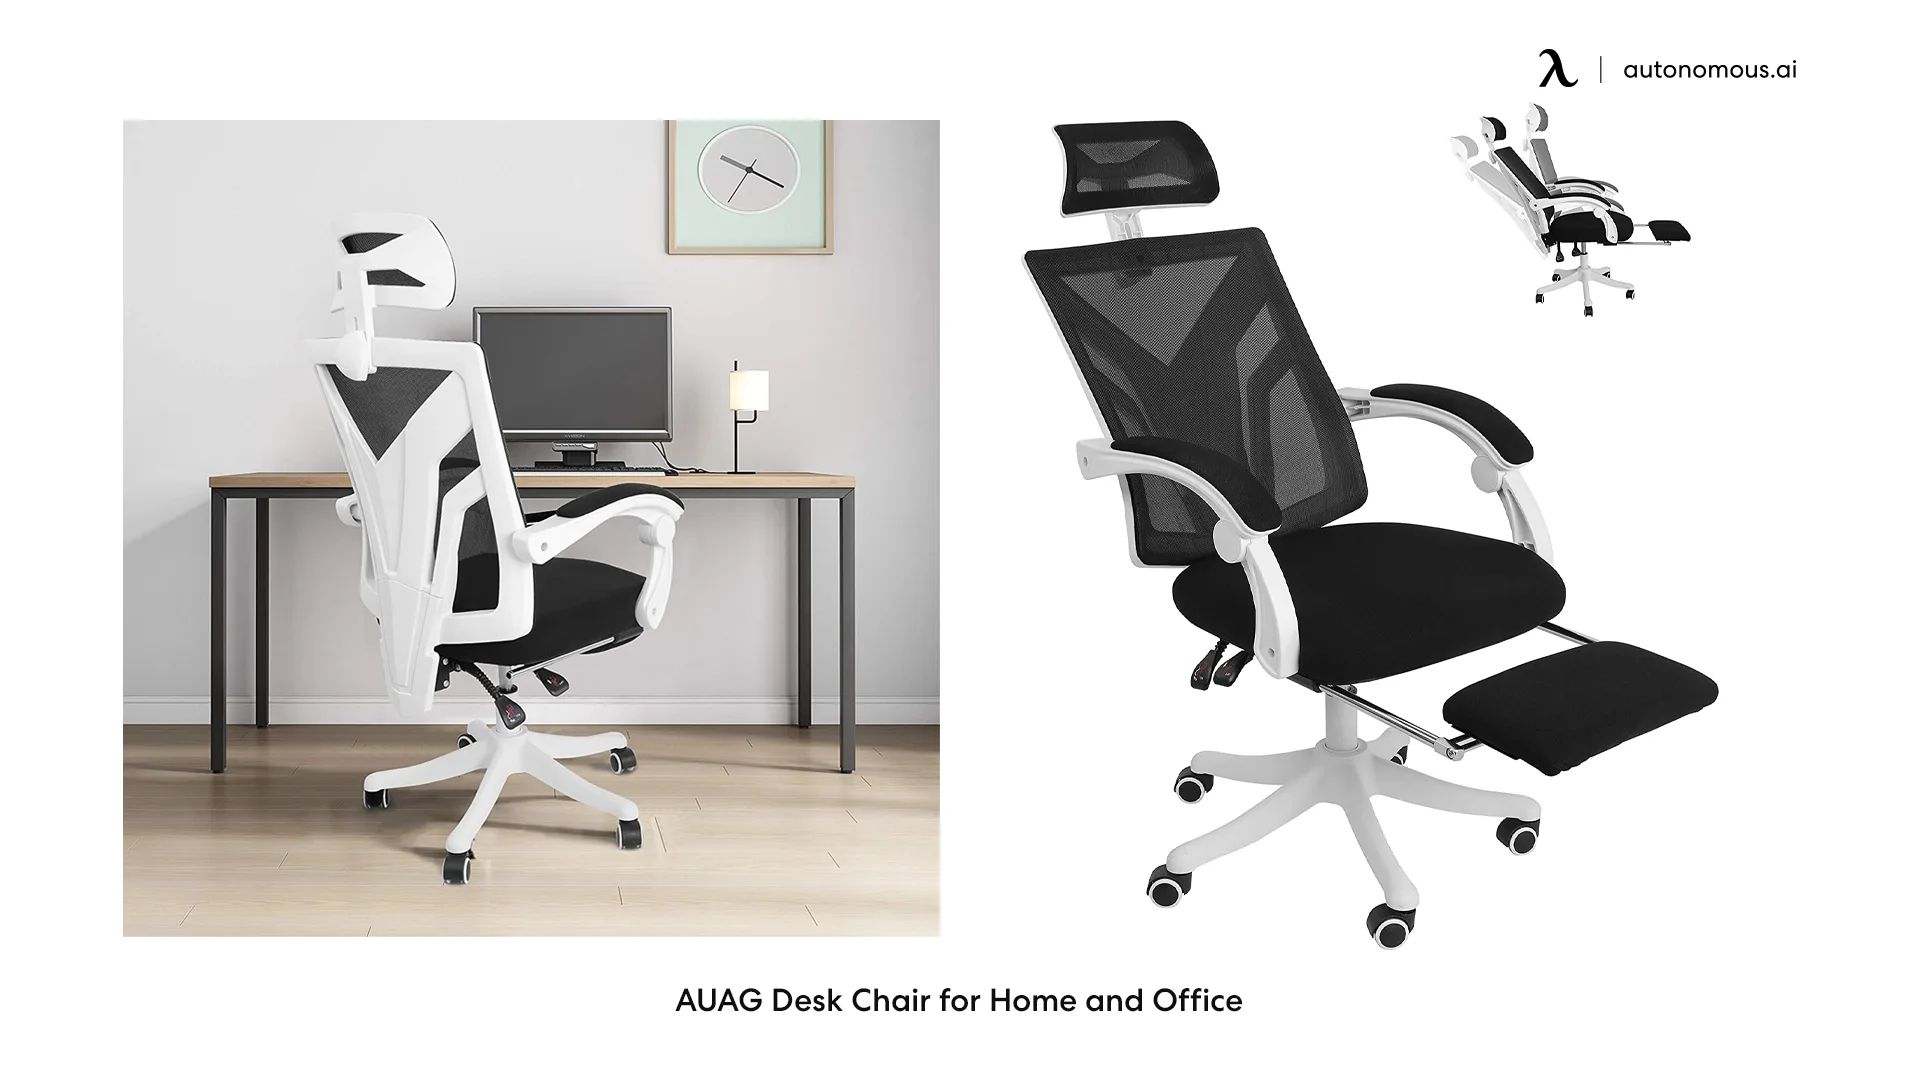 AUAG Desk Chair for Home and Office